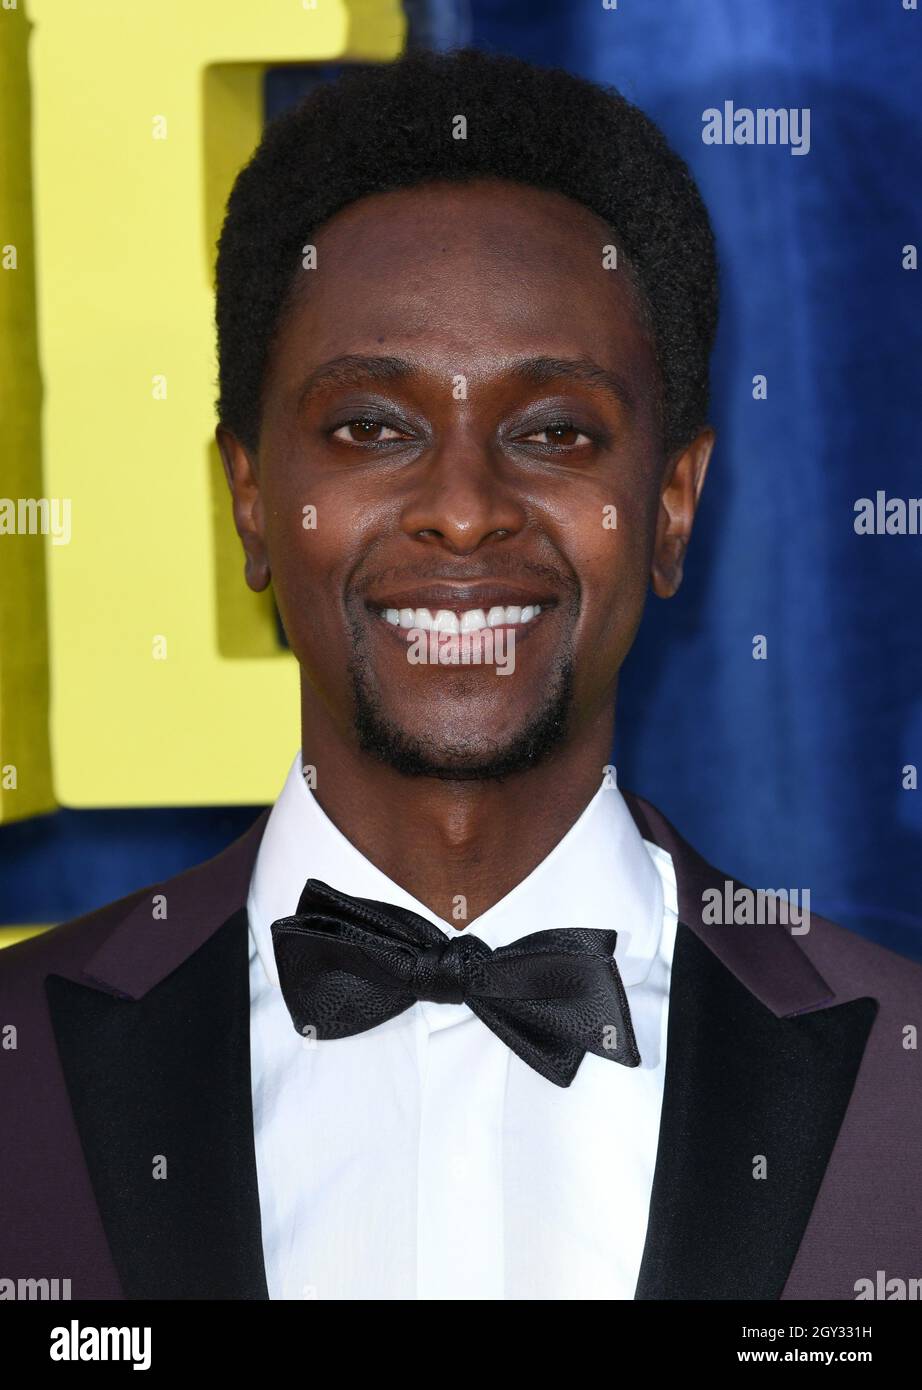 London, UK. October 6th, 2021, London, UK Edi Gathegi arriving at The Harder They Fall World Premiere, the opening night film of the BFI London Film Festival, held at The Royal Festival Hall. Credit: Doug Peters/EMPICS/Alamy Live News Stock Photo